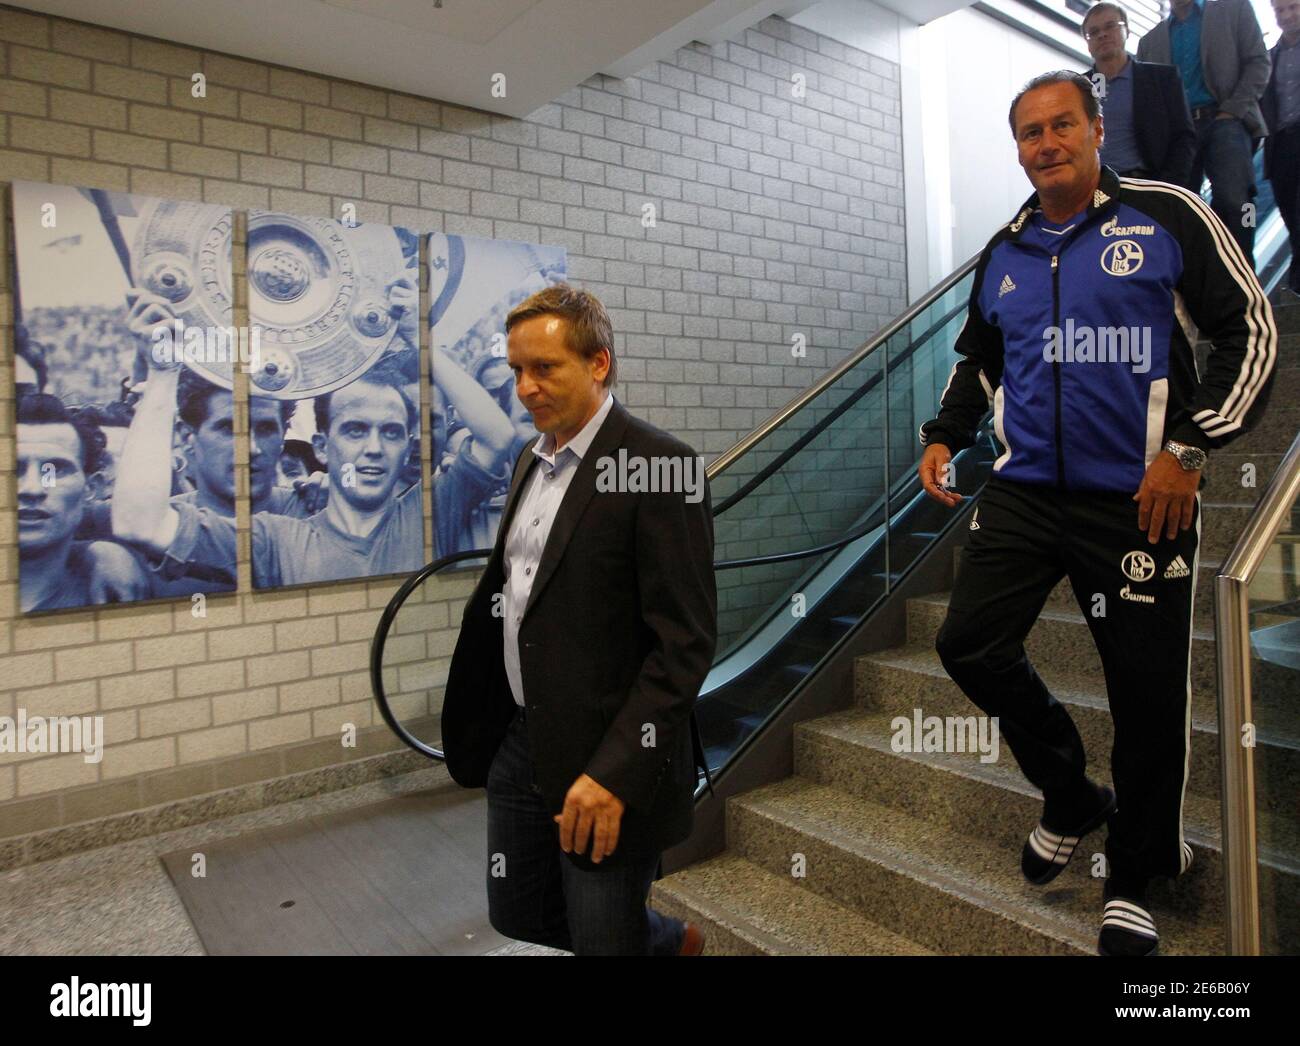 Schalke 04's new coach Huub Stevens (R) and manager Horst Heldt arrive for  a news conference in Gelsenkirchen, September 27, 2011. Schalke 04 have  appointed Dutchman Huub Stevens, who had coached the